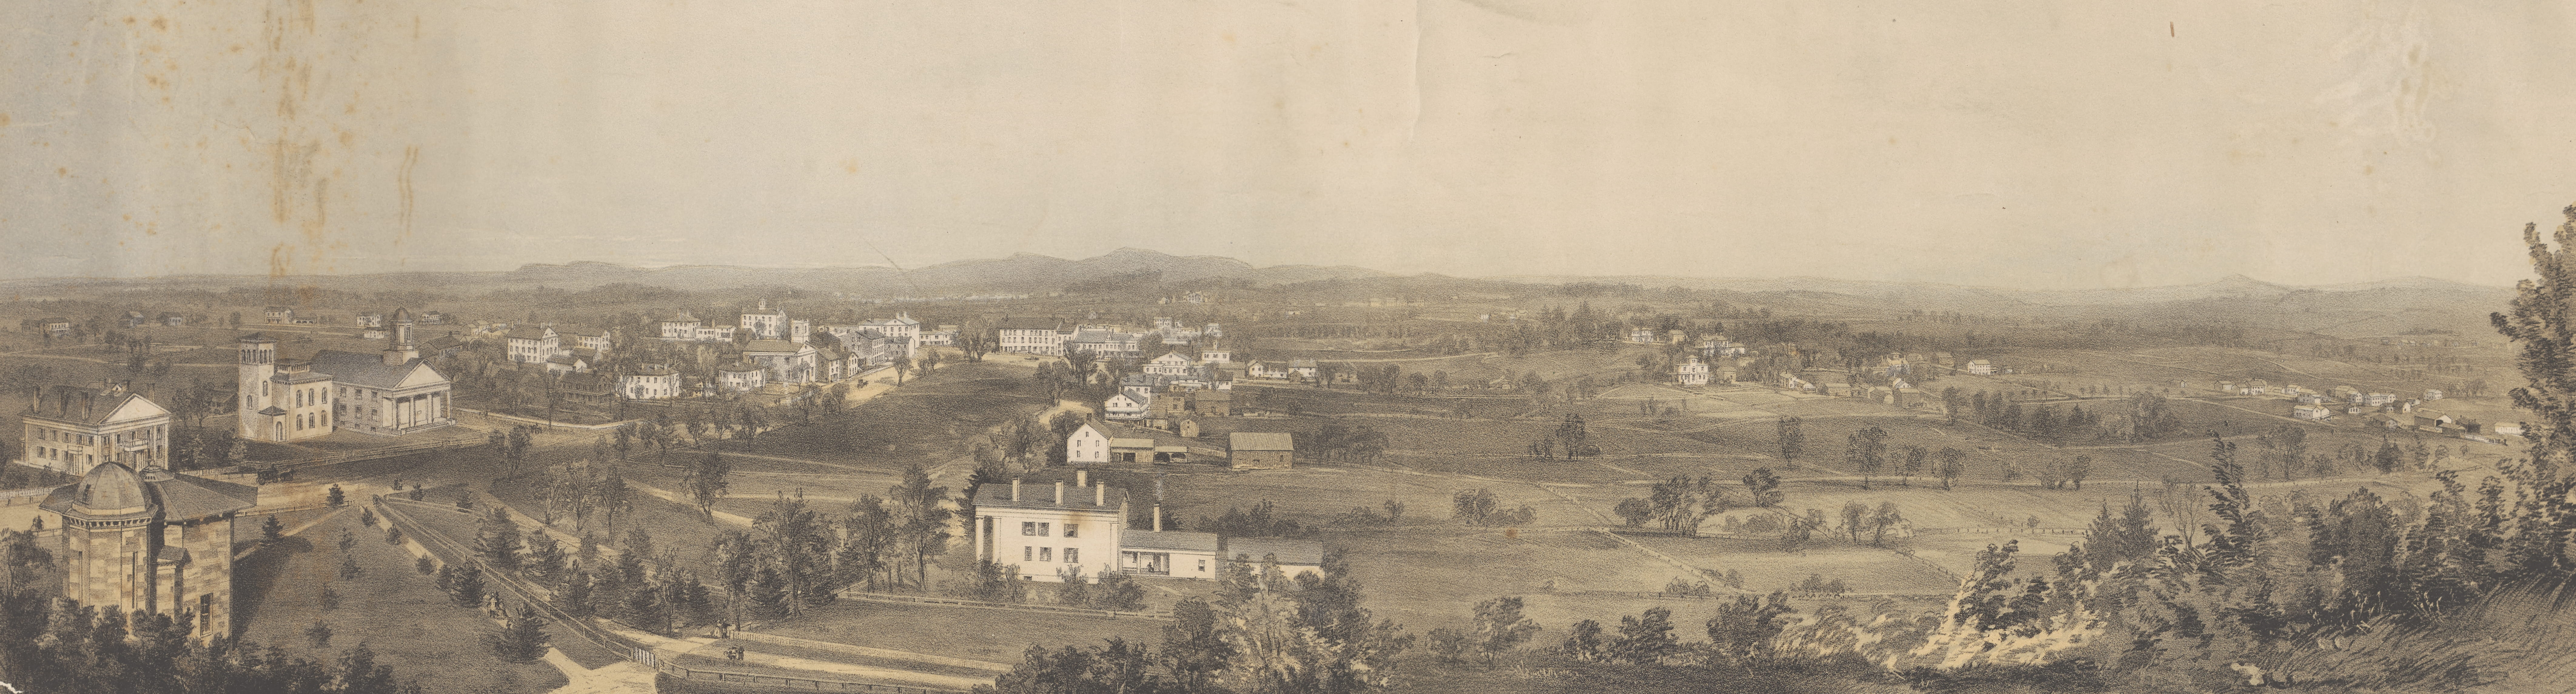 black and white photograph of Amherst, MA featuring Amherst College, 1800s